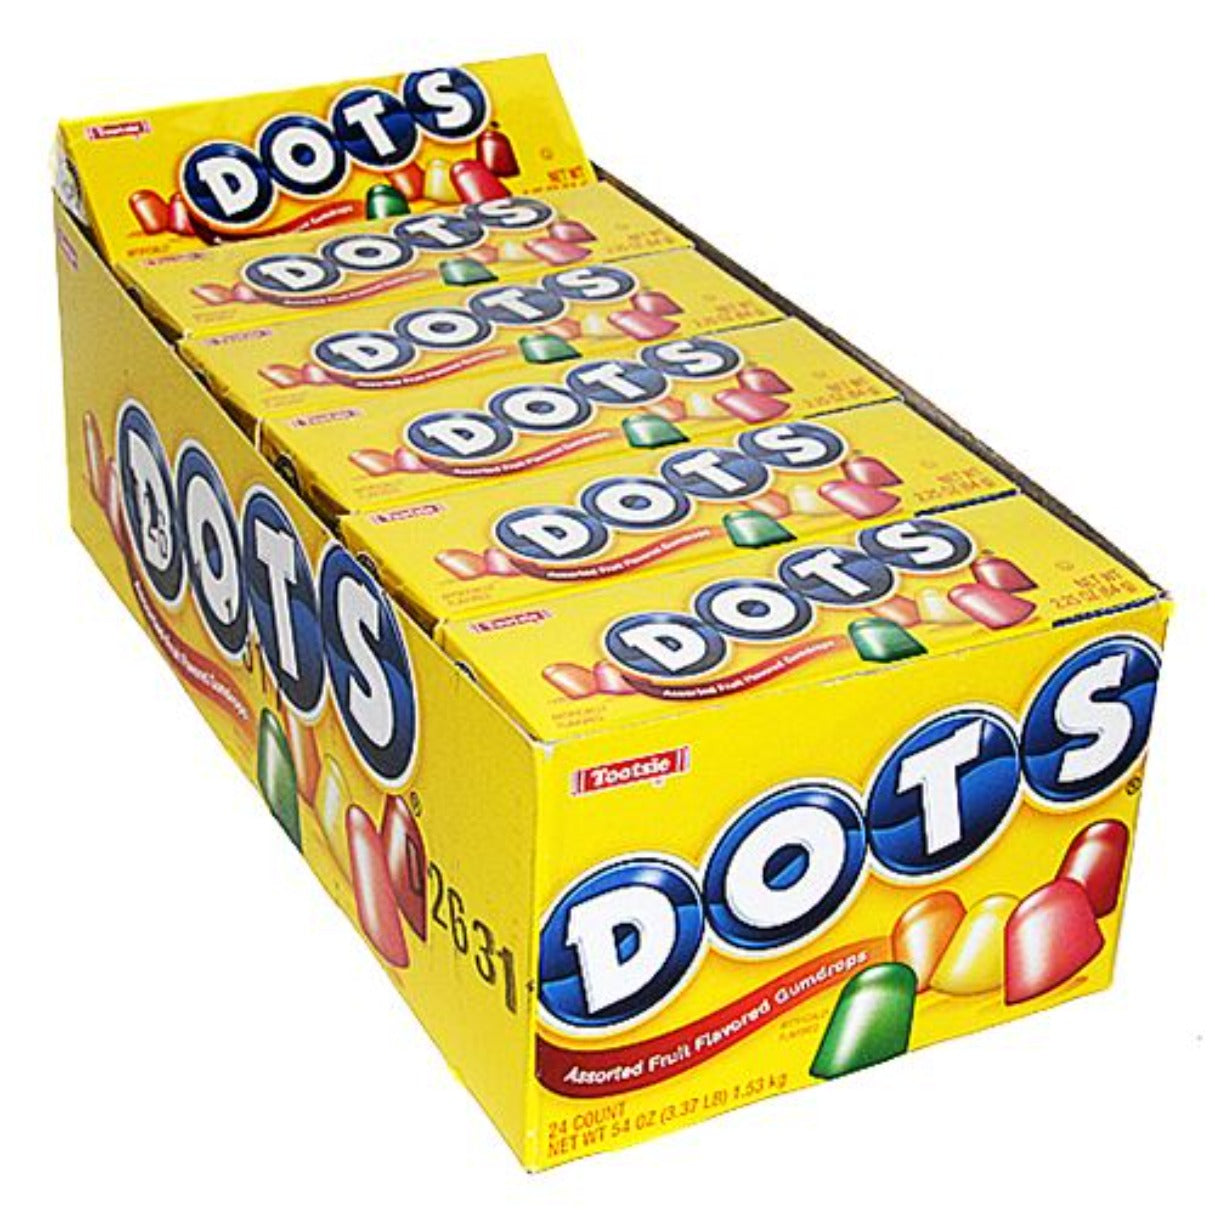 Dots Assorted Fruit Flavored Gumdrops Theater Box 2.25oz - 24ct